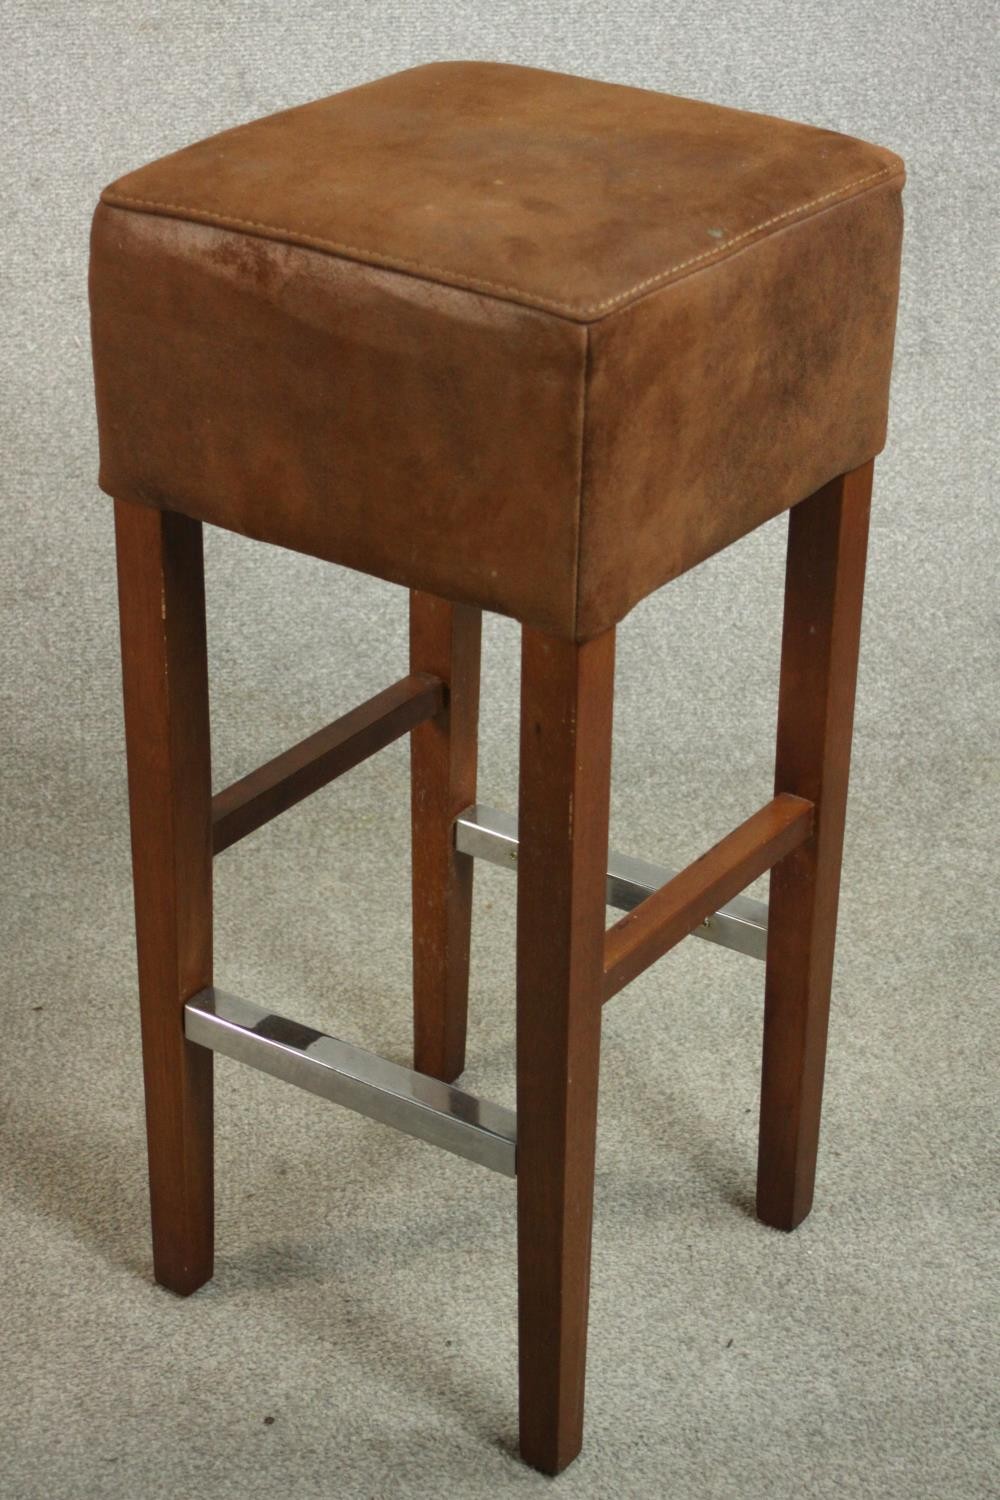 A set of three Andy Thornton contemporary bar stools, with brown suede upholstered seats, on - Image 6 of 8